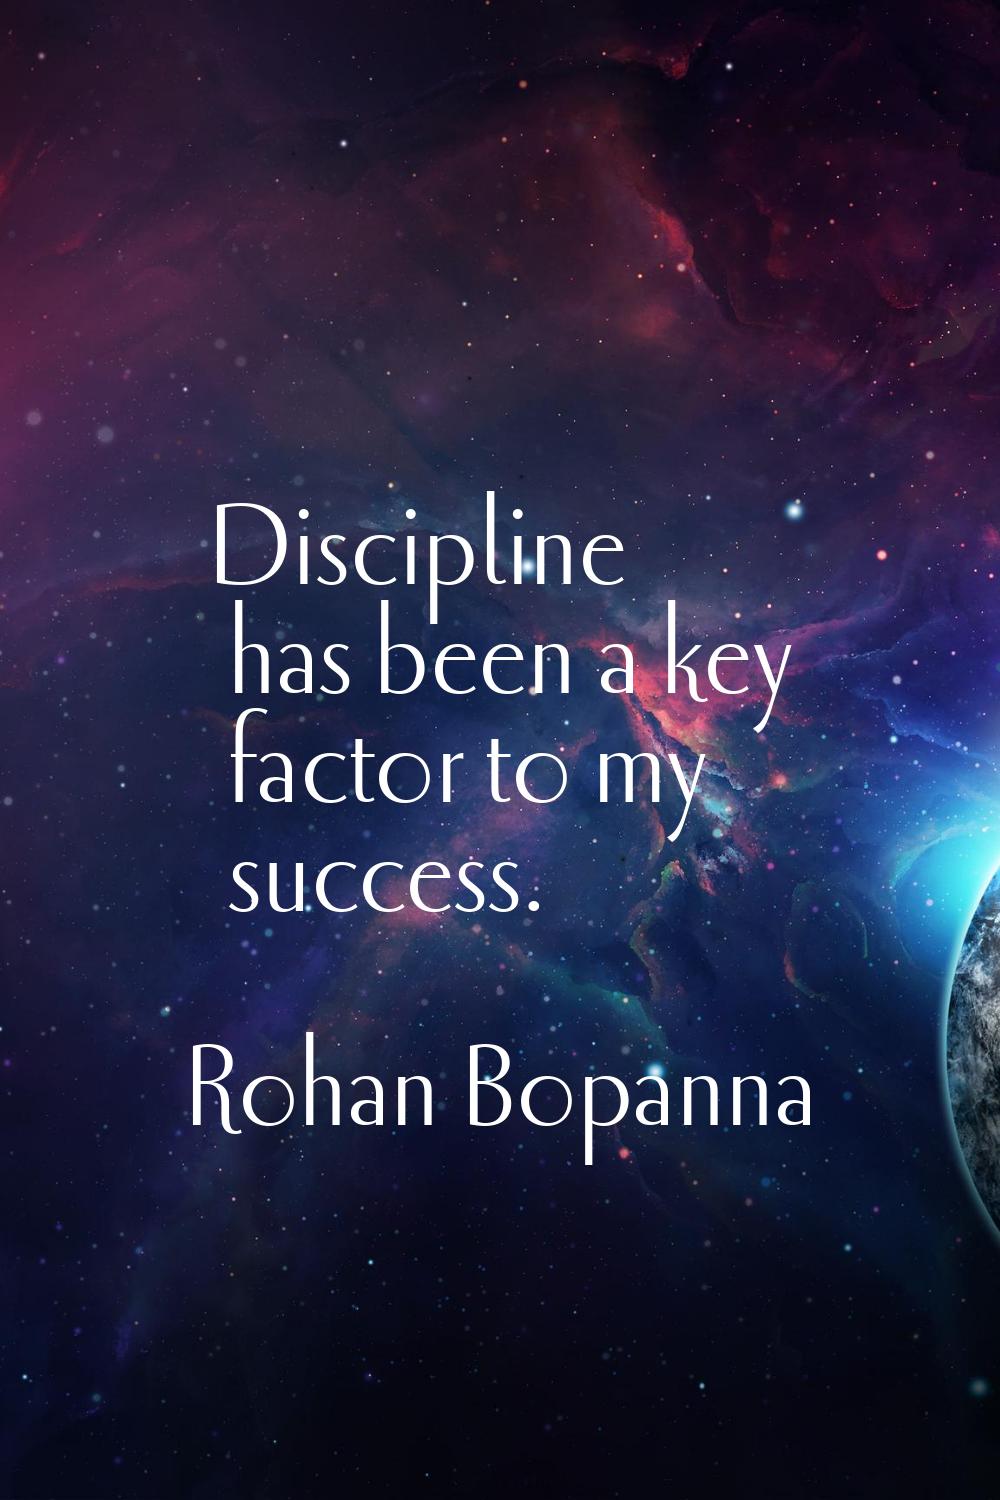 Discipline has been a key factor to my success.